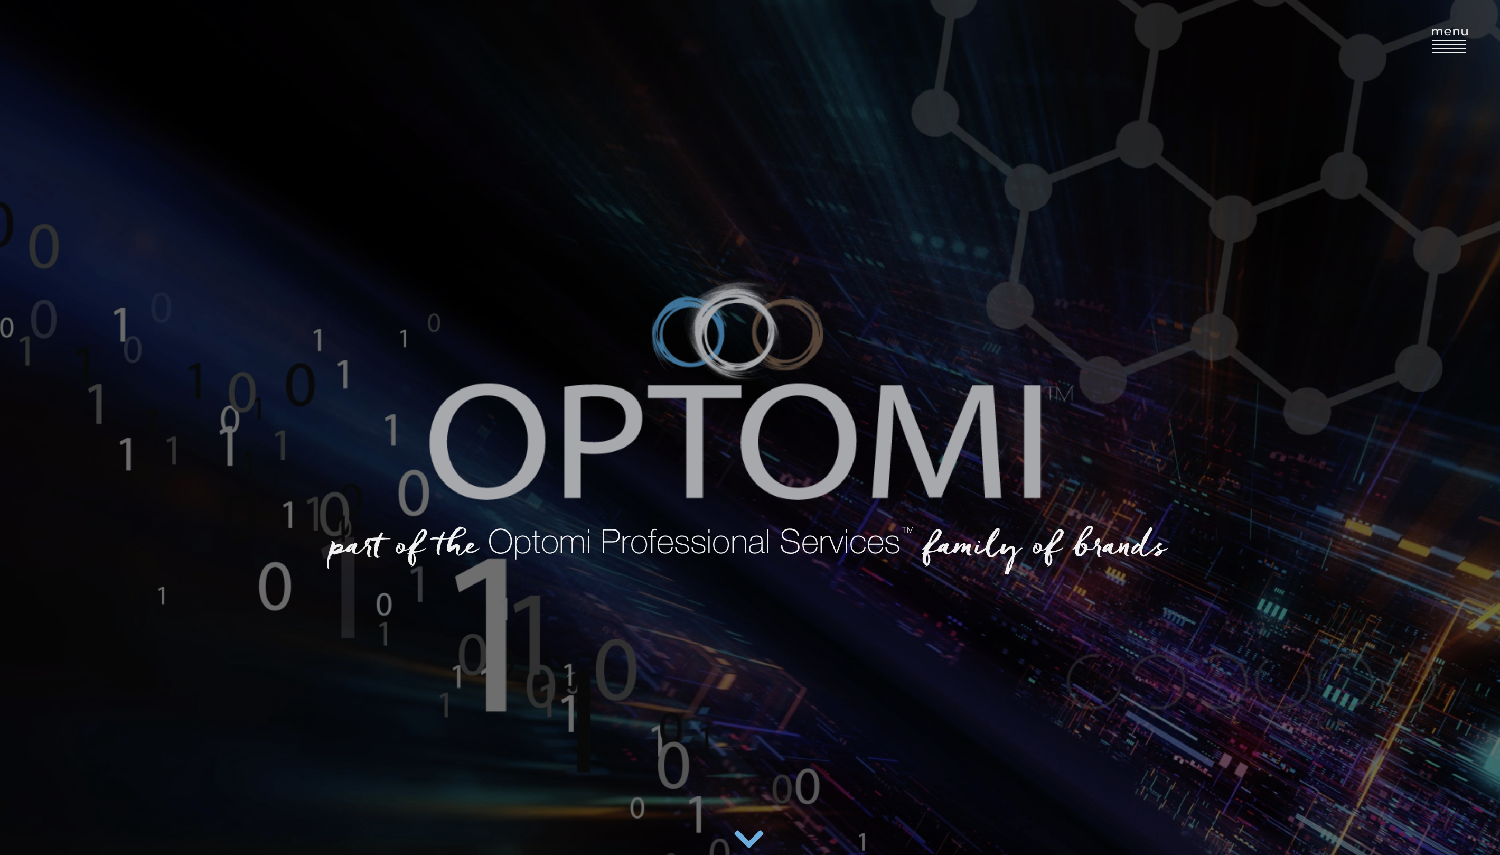 Optomi Website home page